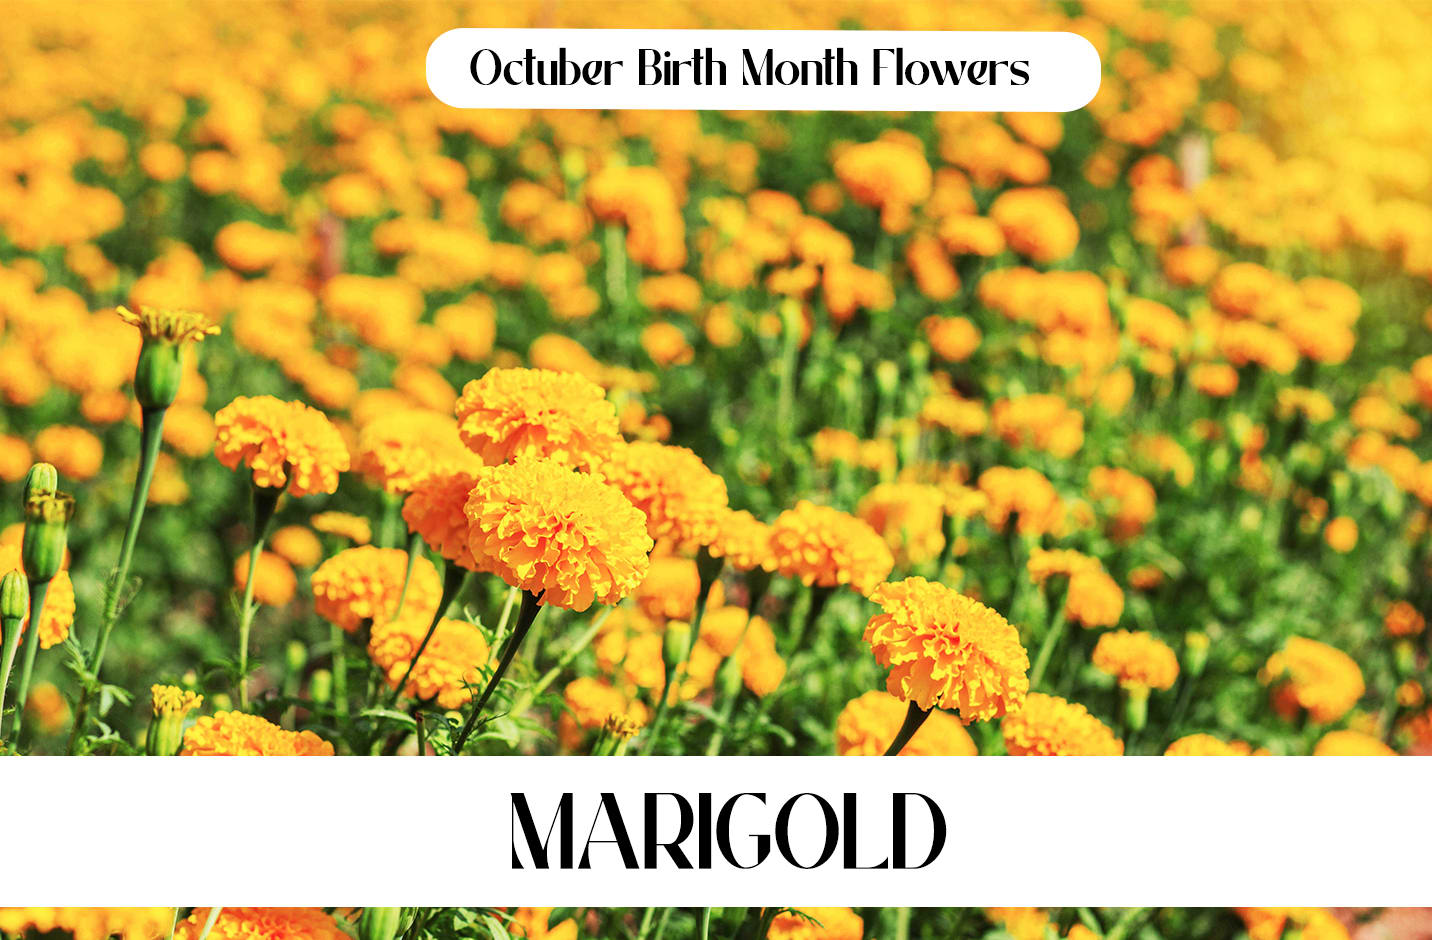 October Birth Month Flowers